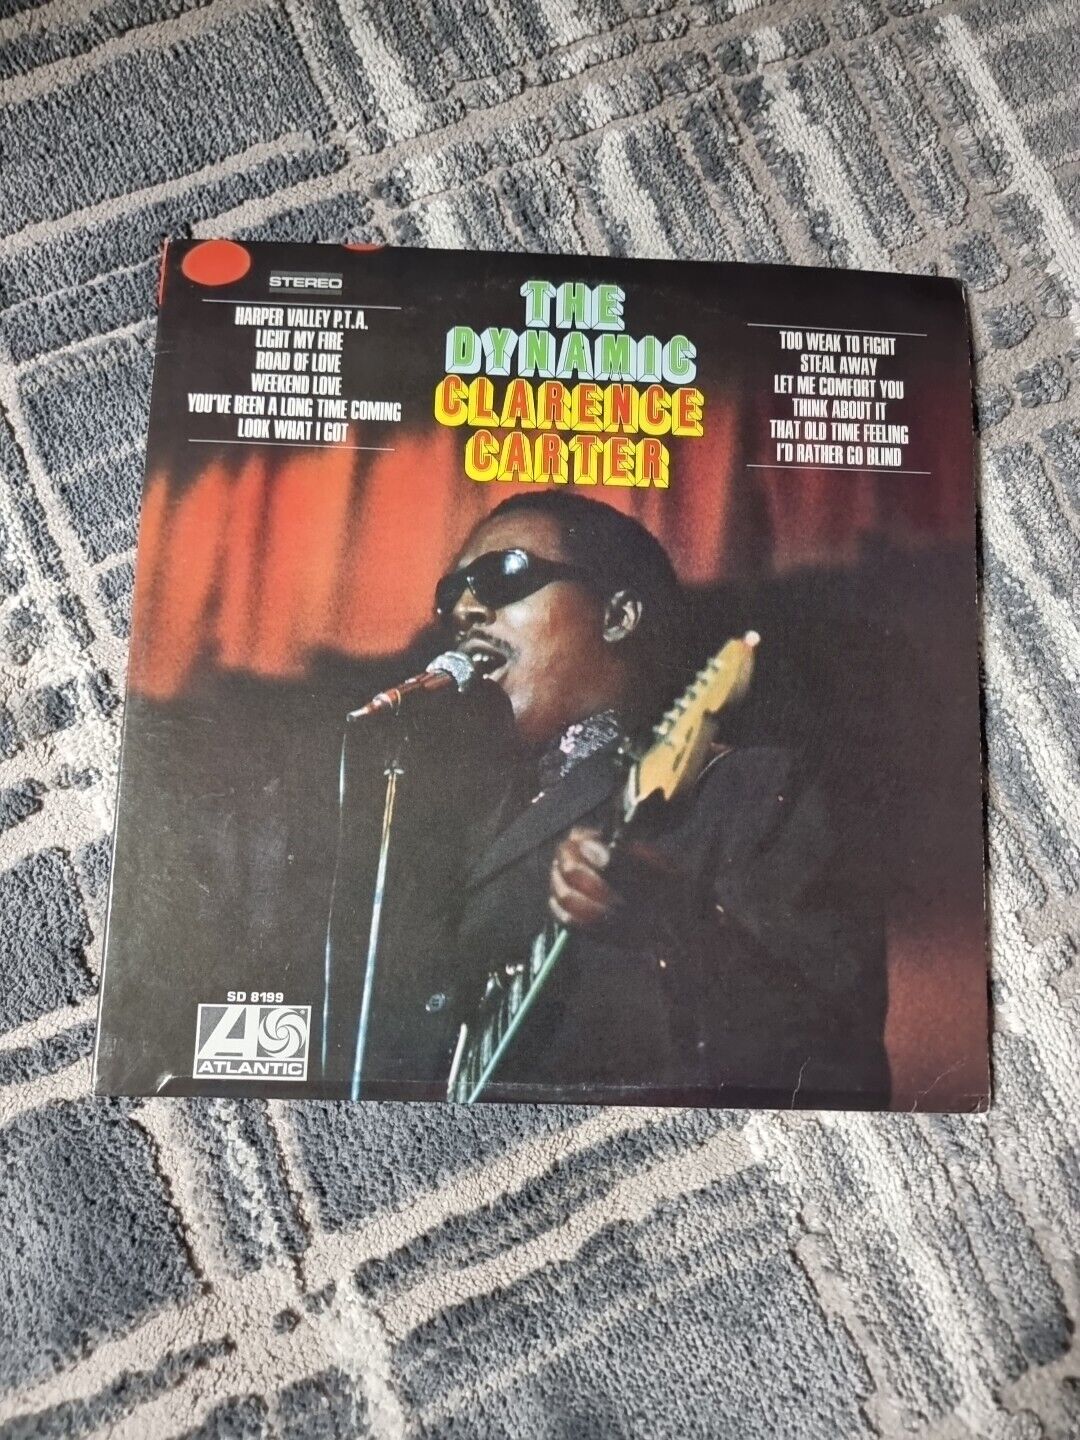 CLARENCE CARTER The Dynamic Clarence Carter BLUES  ATLANTIC SD 8199 SEALED LP